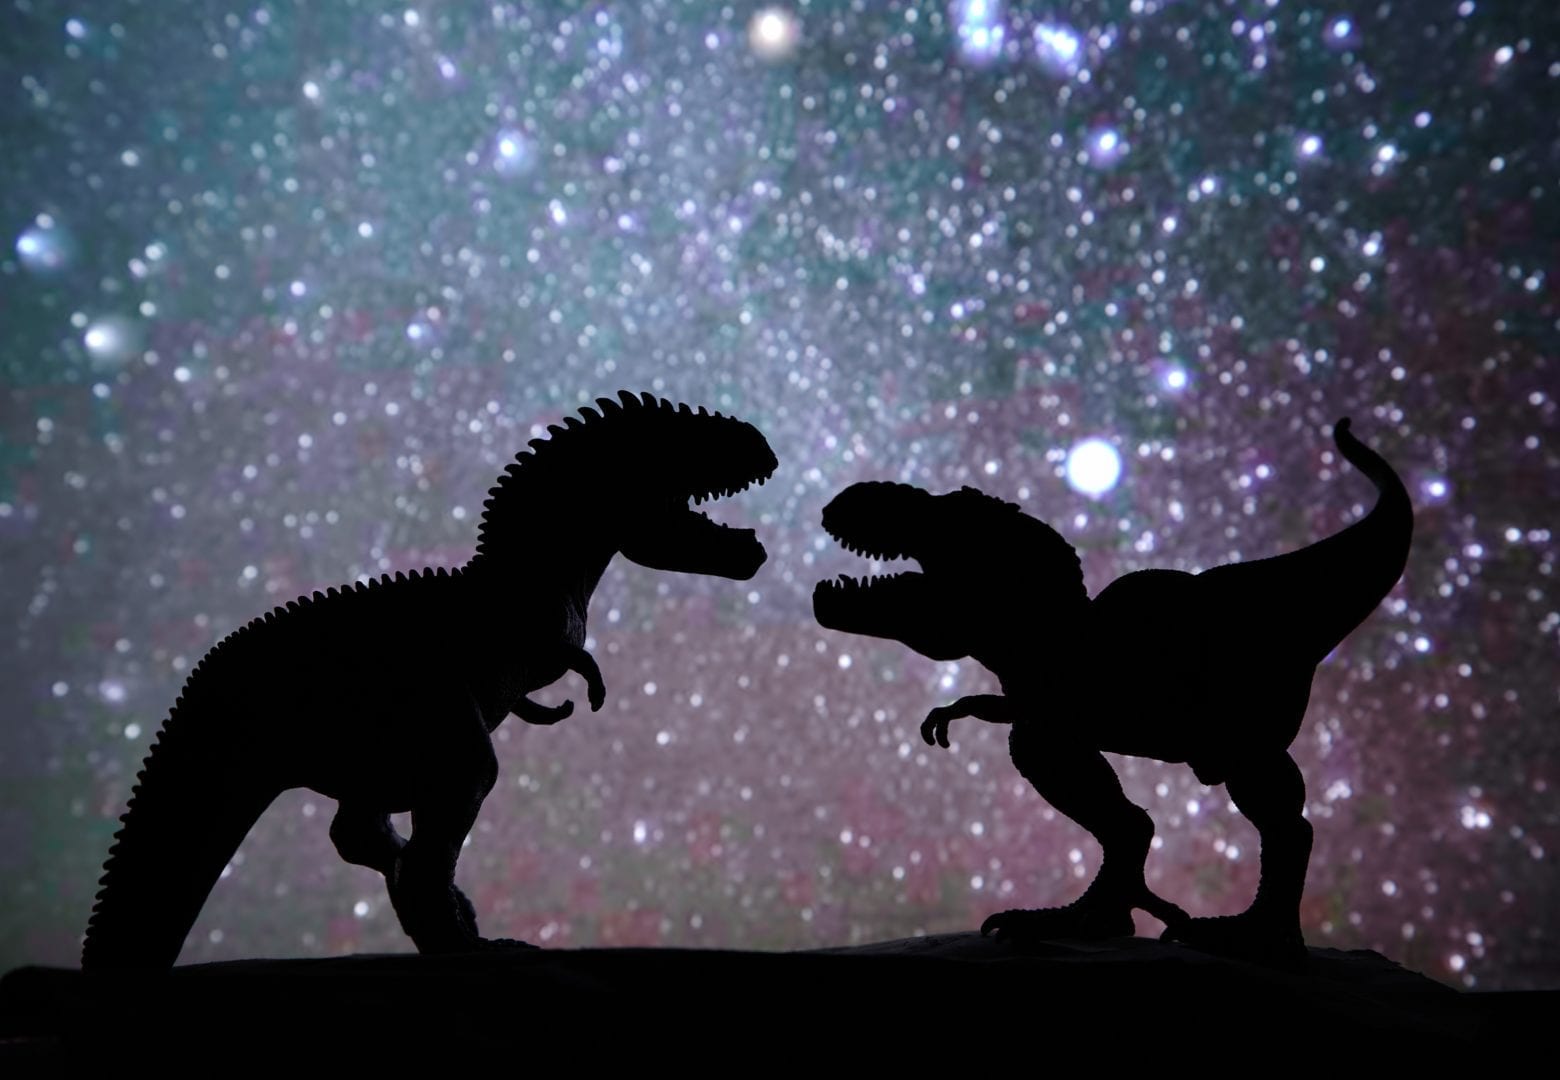 silhouettes of 2 t-rex dinosaurs battling under a starry sky